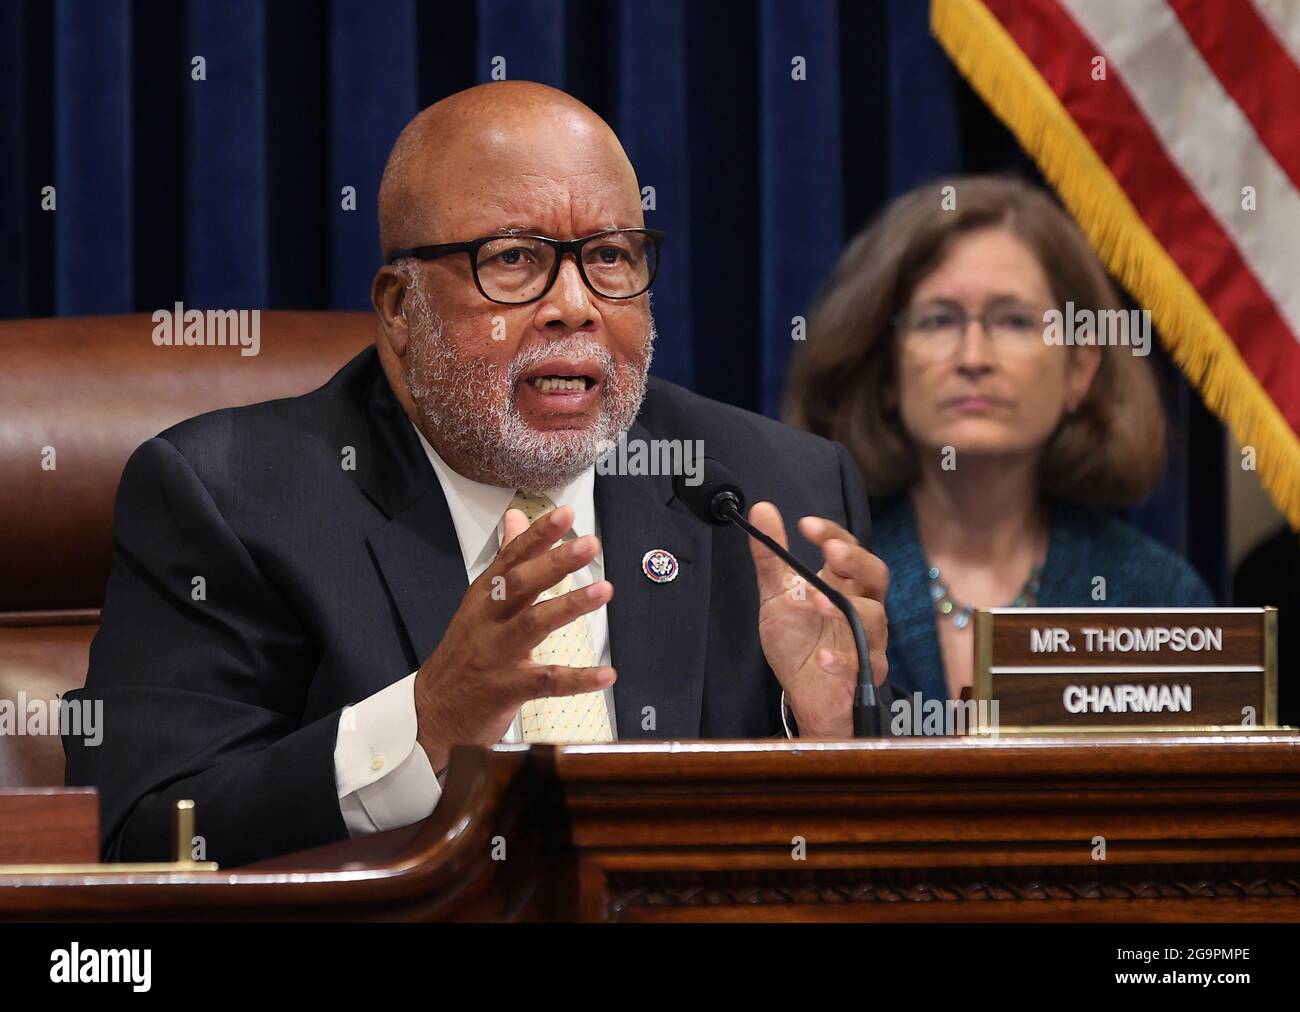 Washington, United States. 27th July, 2021. Chairman Rep. Bennie Thompson (D-MS) questions witnesses during the first hearing of the House Select Committee investigating the January 6 attack on the U.S. Capitol at the Canon House Office Building in Washington, DC on Tuesday, on July 27, 2021. About 140 police officers were injured when they were trampled by the former President Donald Trump supporters aiming to overthrow the 2020 presidential election. Five people died. Pool Photo by Chip Somodevilla/UPI Credit: UPI/Alamy Live News Stock Photo